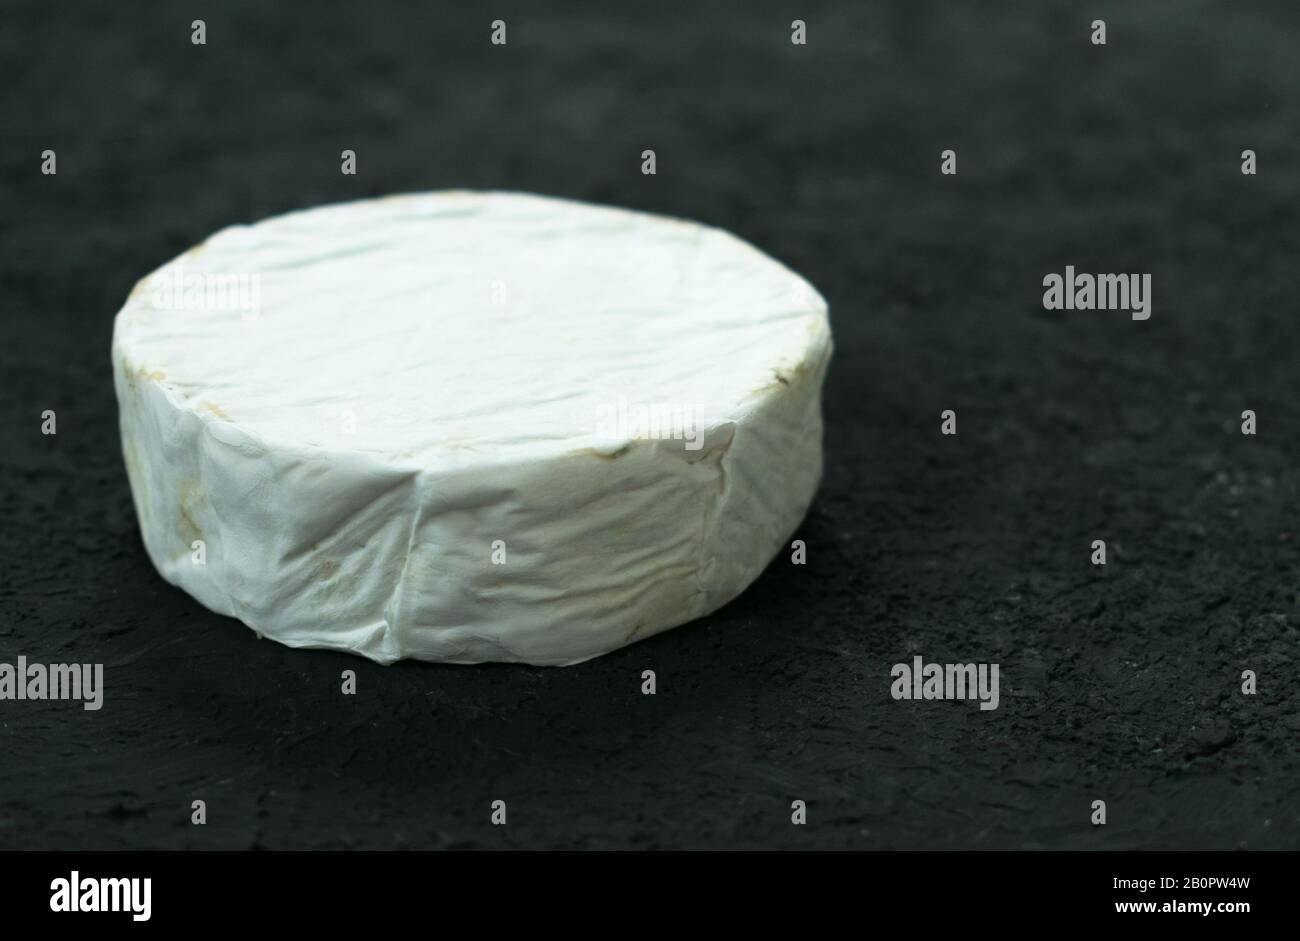 A whole head of Camembert cheese on a black background. Copy space. Stock Photo